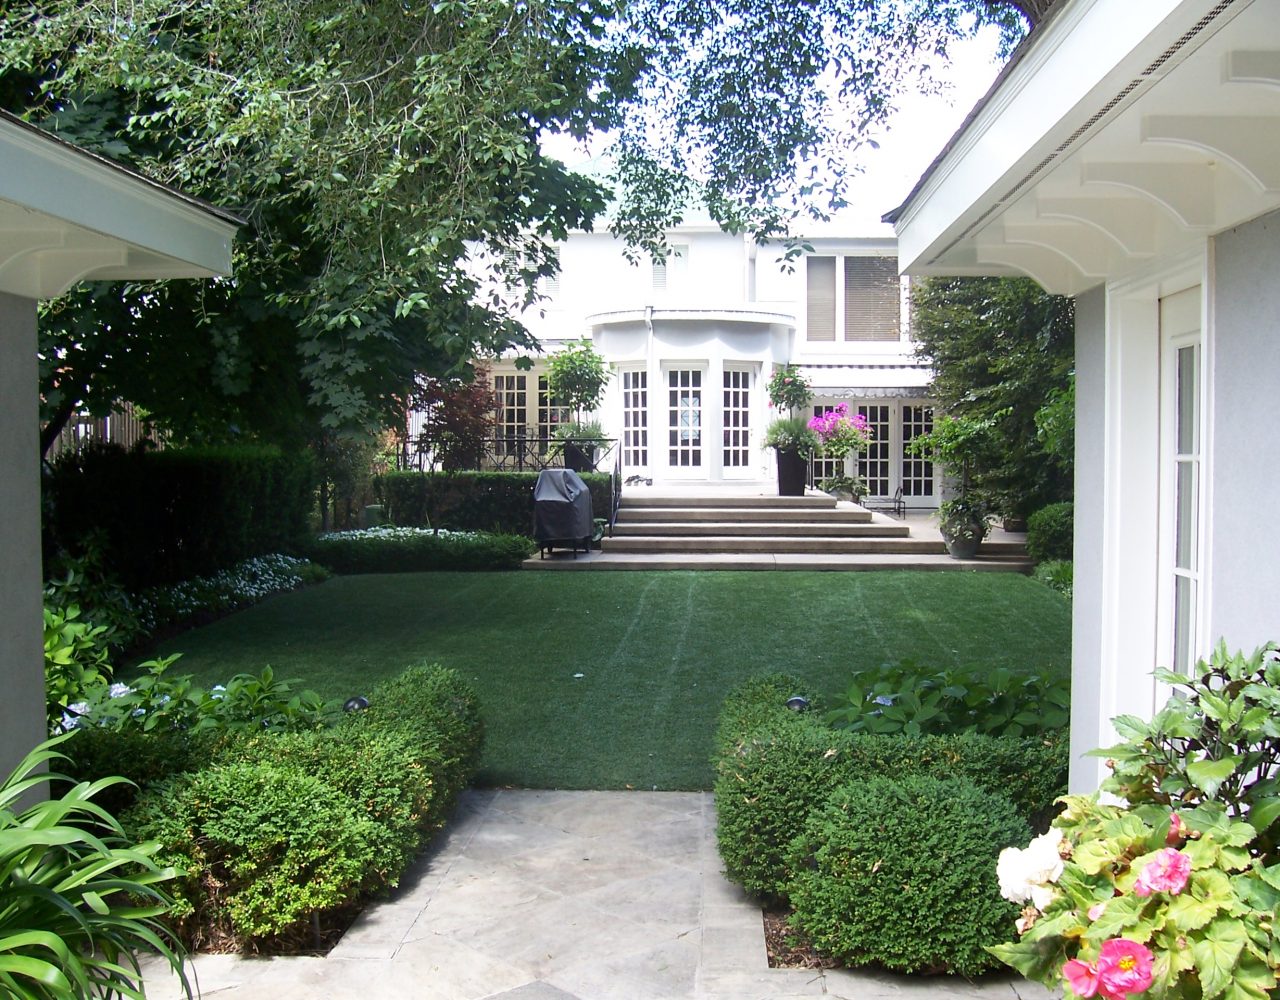 immaculate backyard with formal gardens